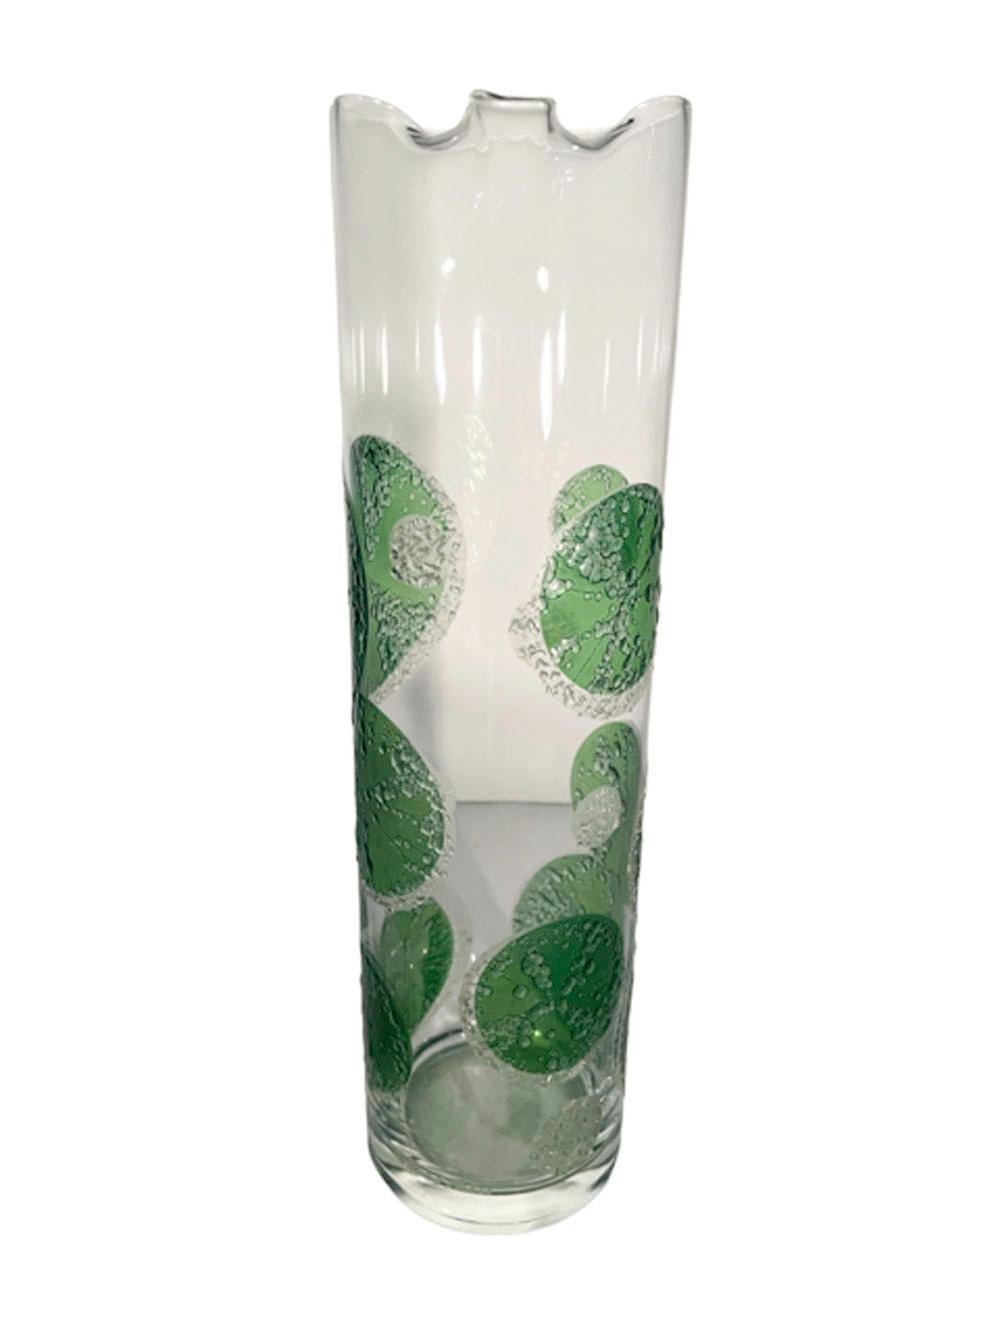 Fred Press Mid-Century Modern cylindrical clear glass cocktail pitcher with translucent green lime slice design having raised textured sugaring in clear enamel.